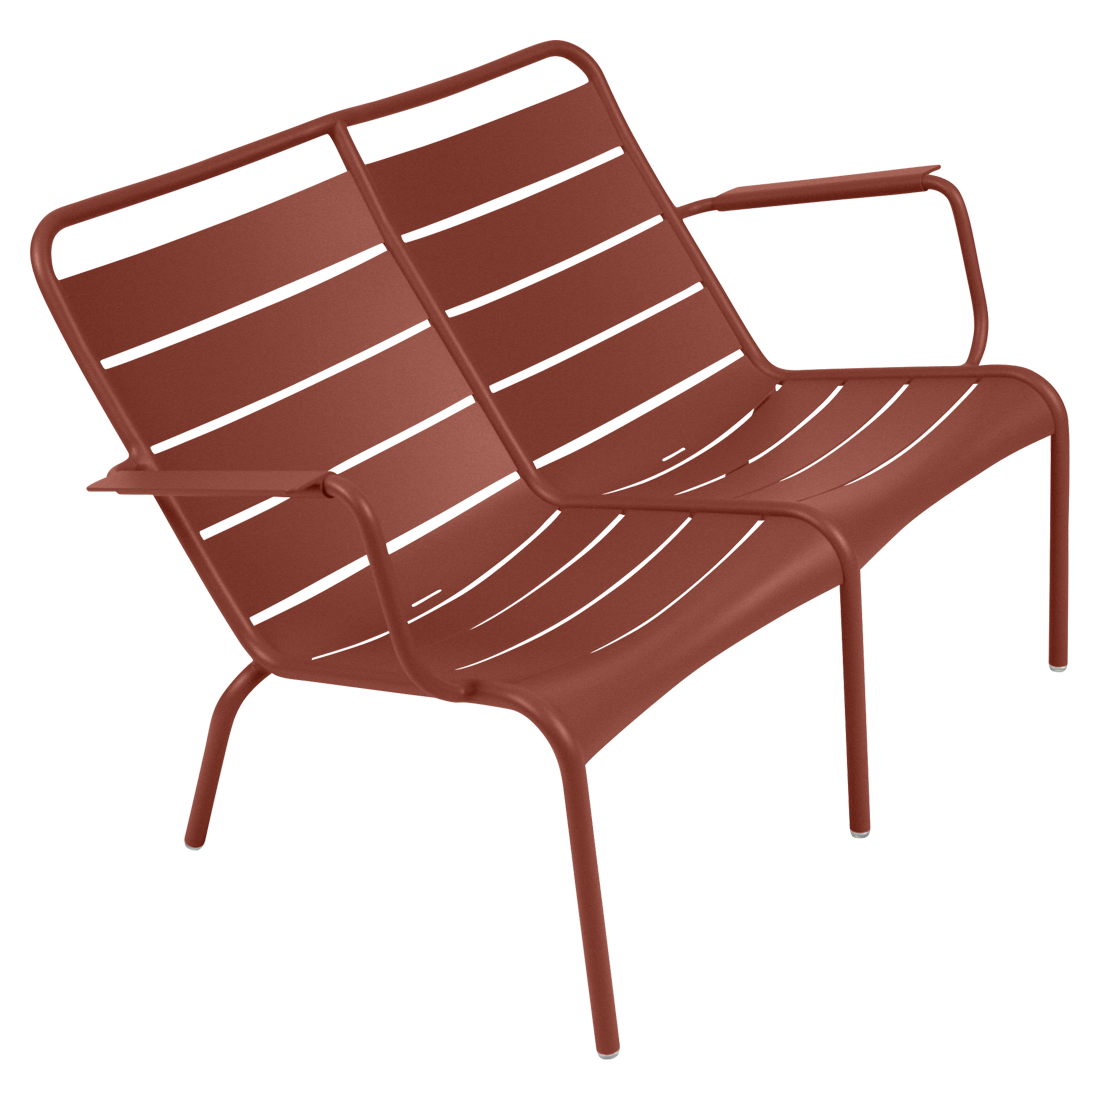 Fauteuil bas duo luxembourg ocre rouge